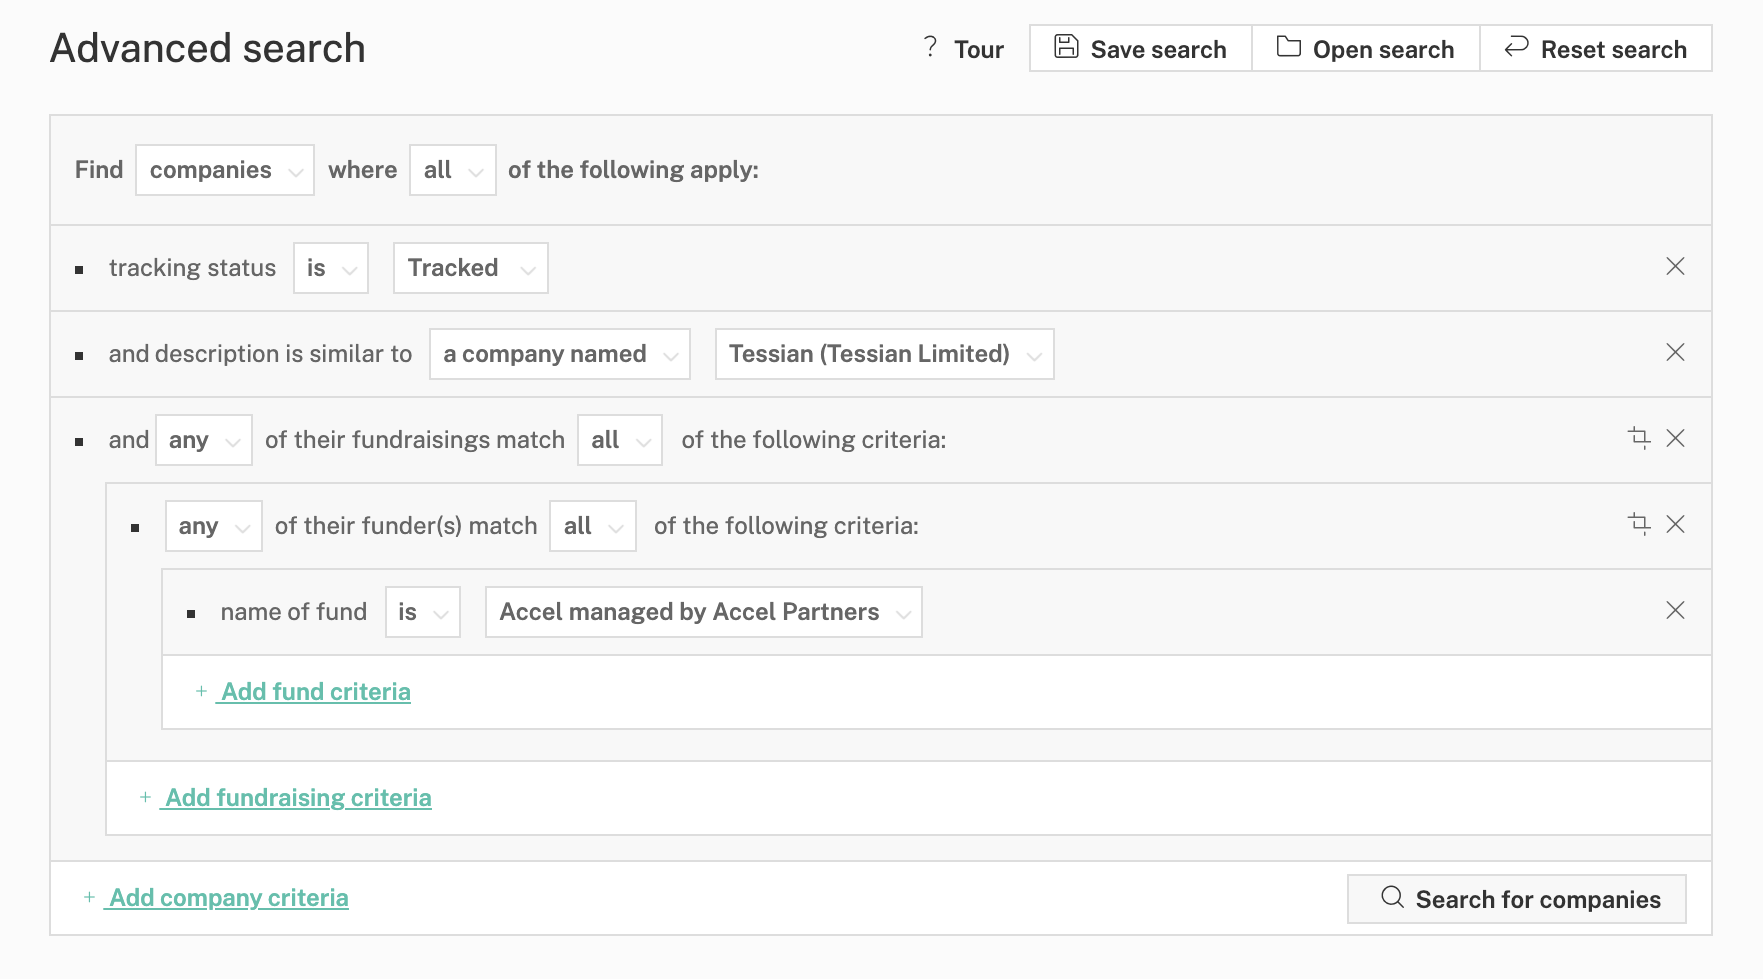 Advanced Search filters on the Beauhurst platform: companies similar to Tessian, backed by Accel